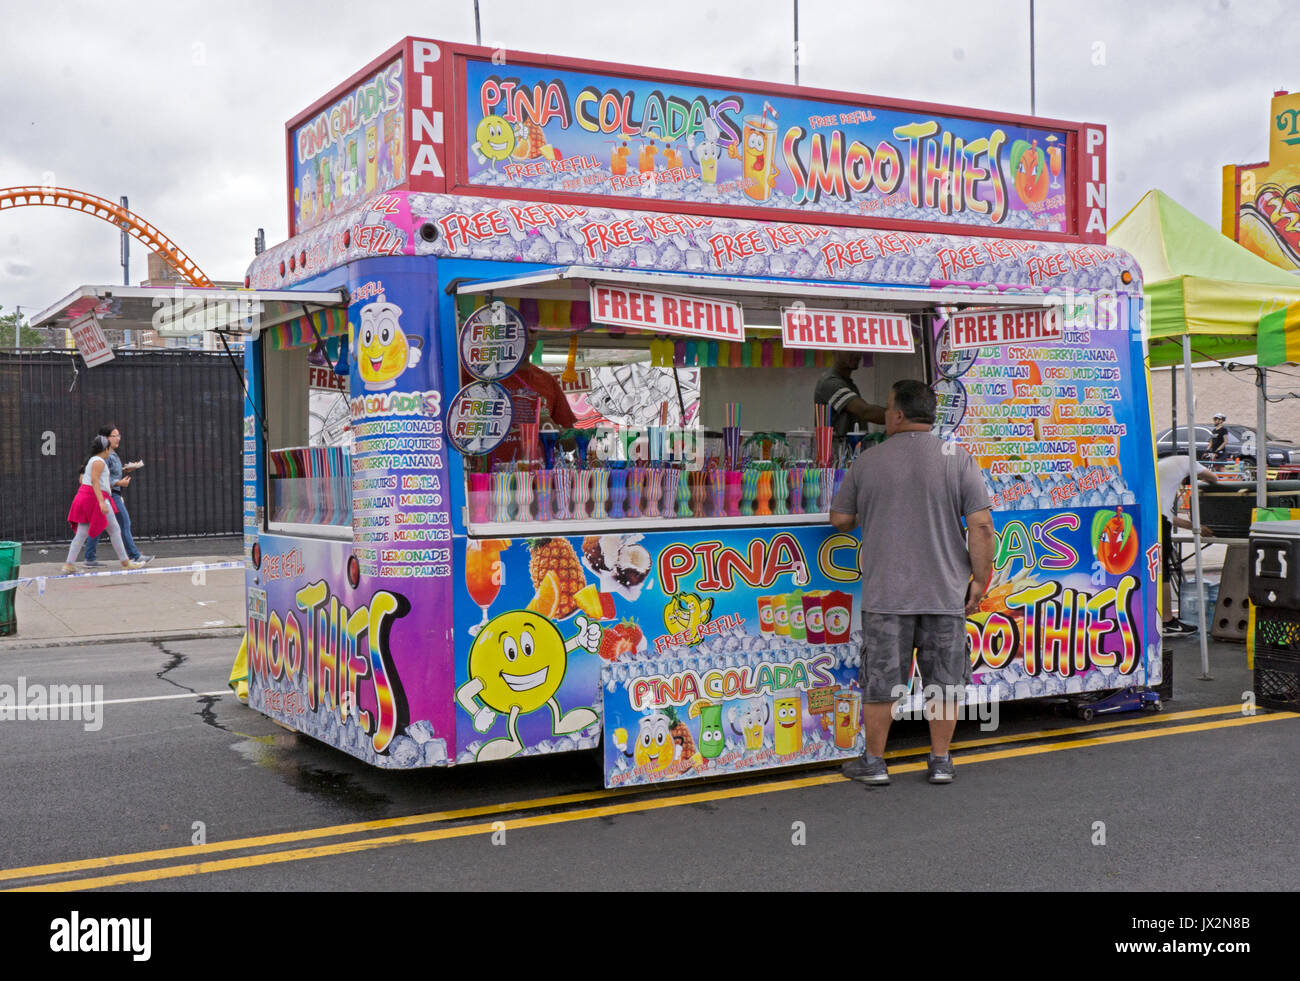 A very colorful stand selling pina coladas and smoothies & offering free refills. At the Coney Island Music festival in Brooklyn, New York Stock Photo